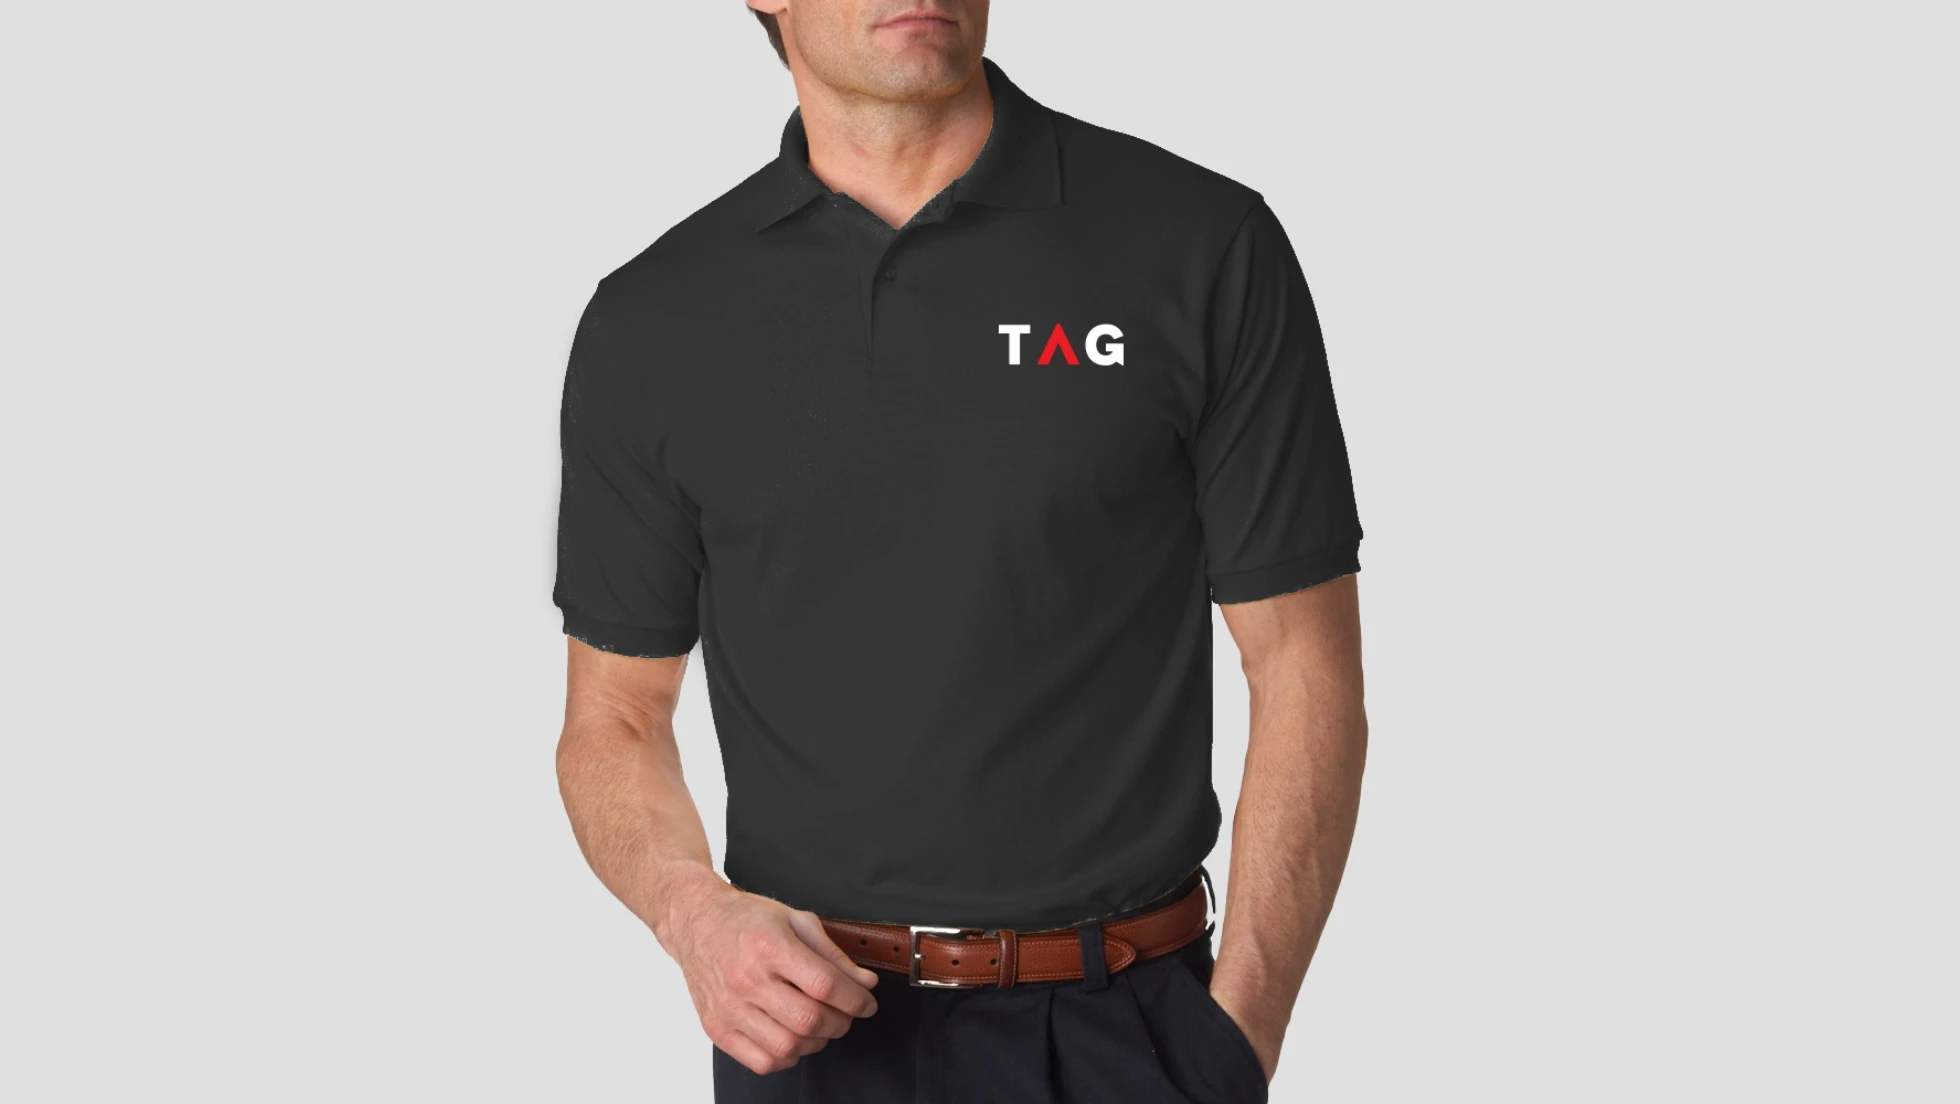 A man wearing a black polo shirt with the tg logo on it.